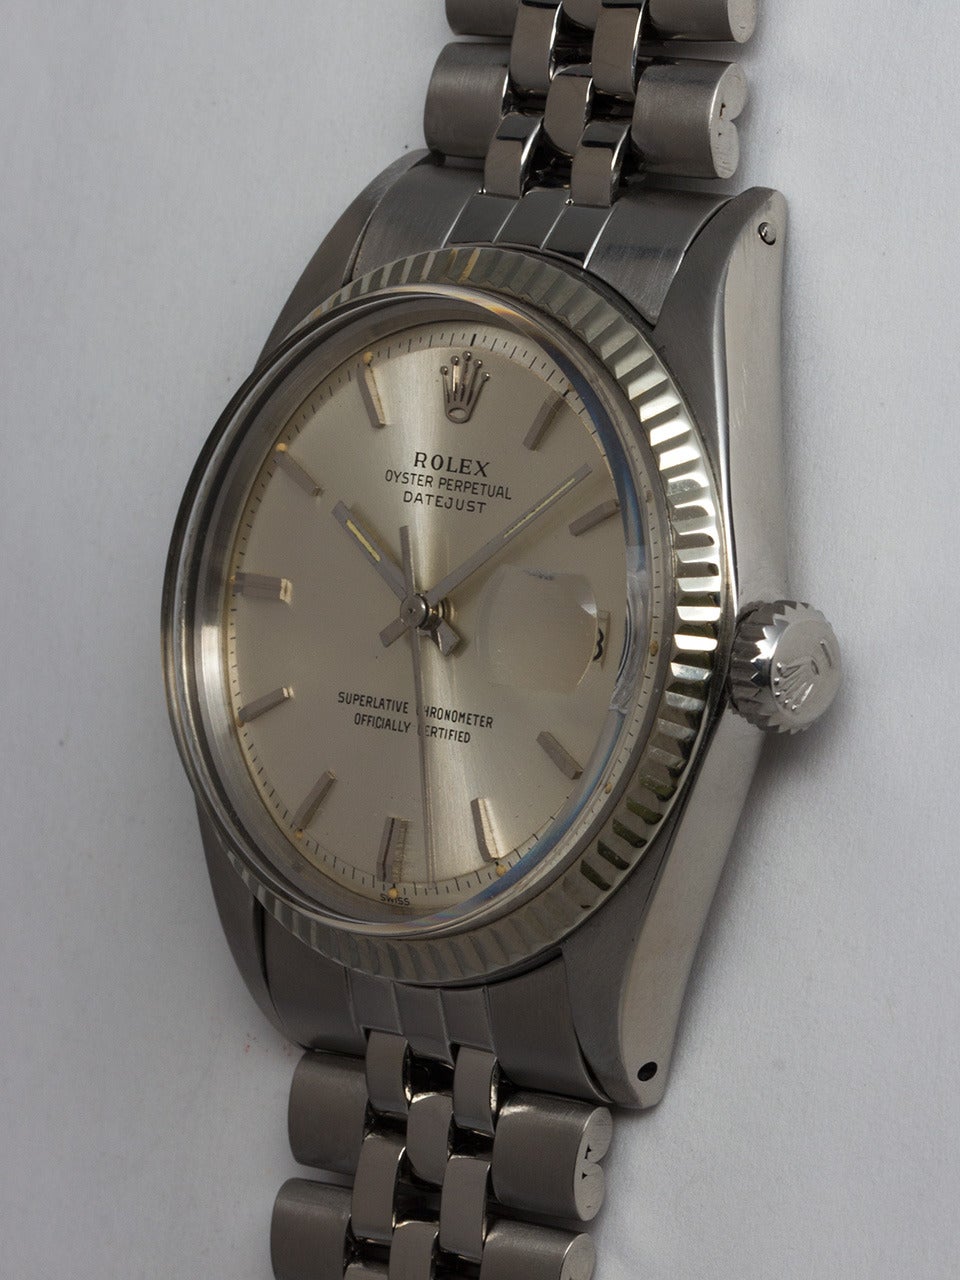 Rolex Stainless Steel Datejust Wristwatch ref 1601 serial# 896,xxx circa 1962/63. 36mm Oyster case with 14K white gold fluted bezel and acrylic crystal. Original exceptionally lively silvered pie pan dial with applied silver indexes and hands.